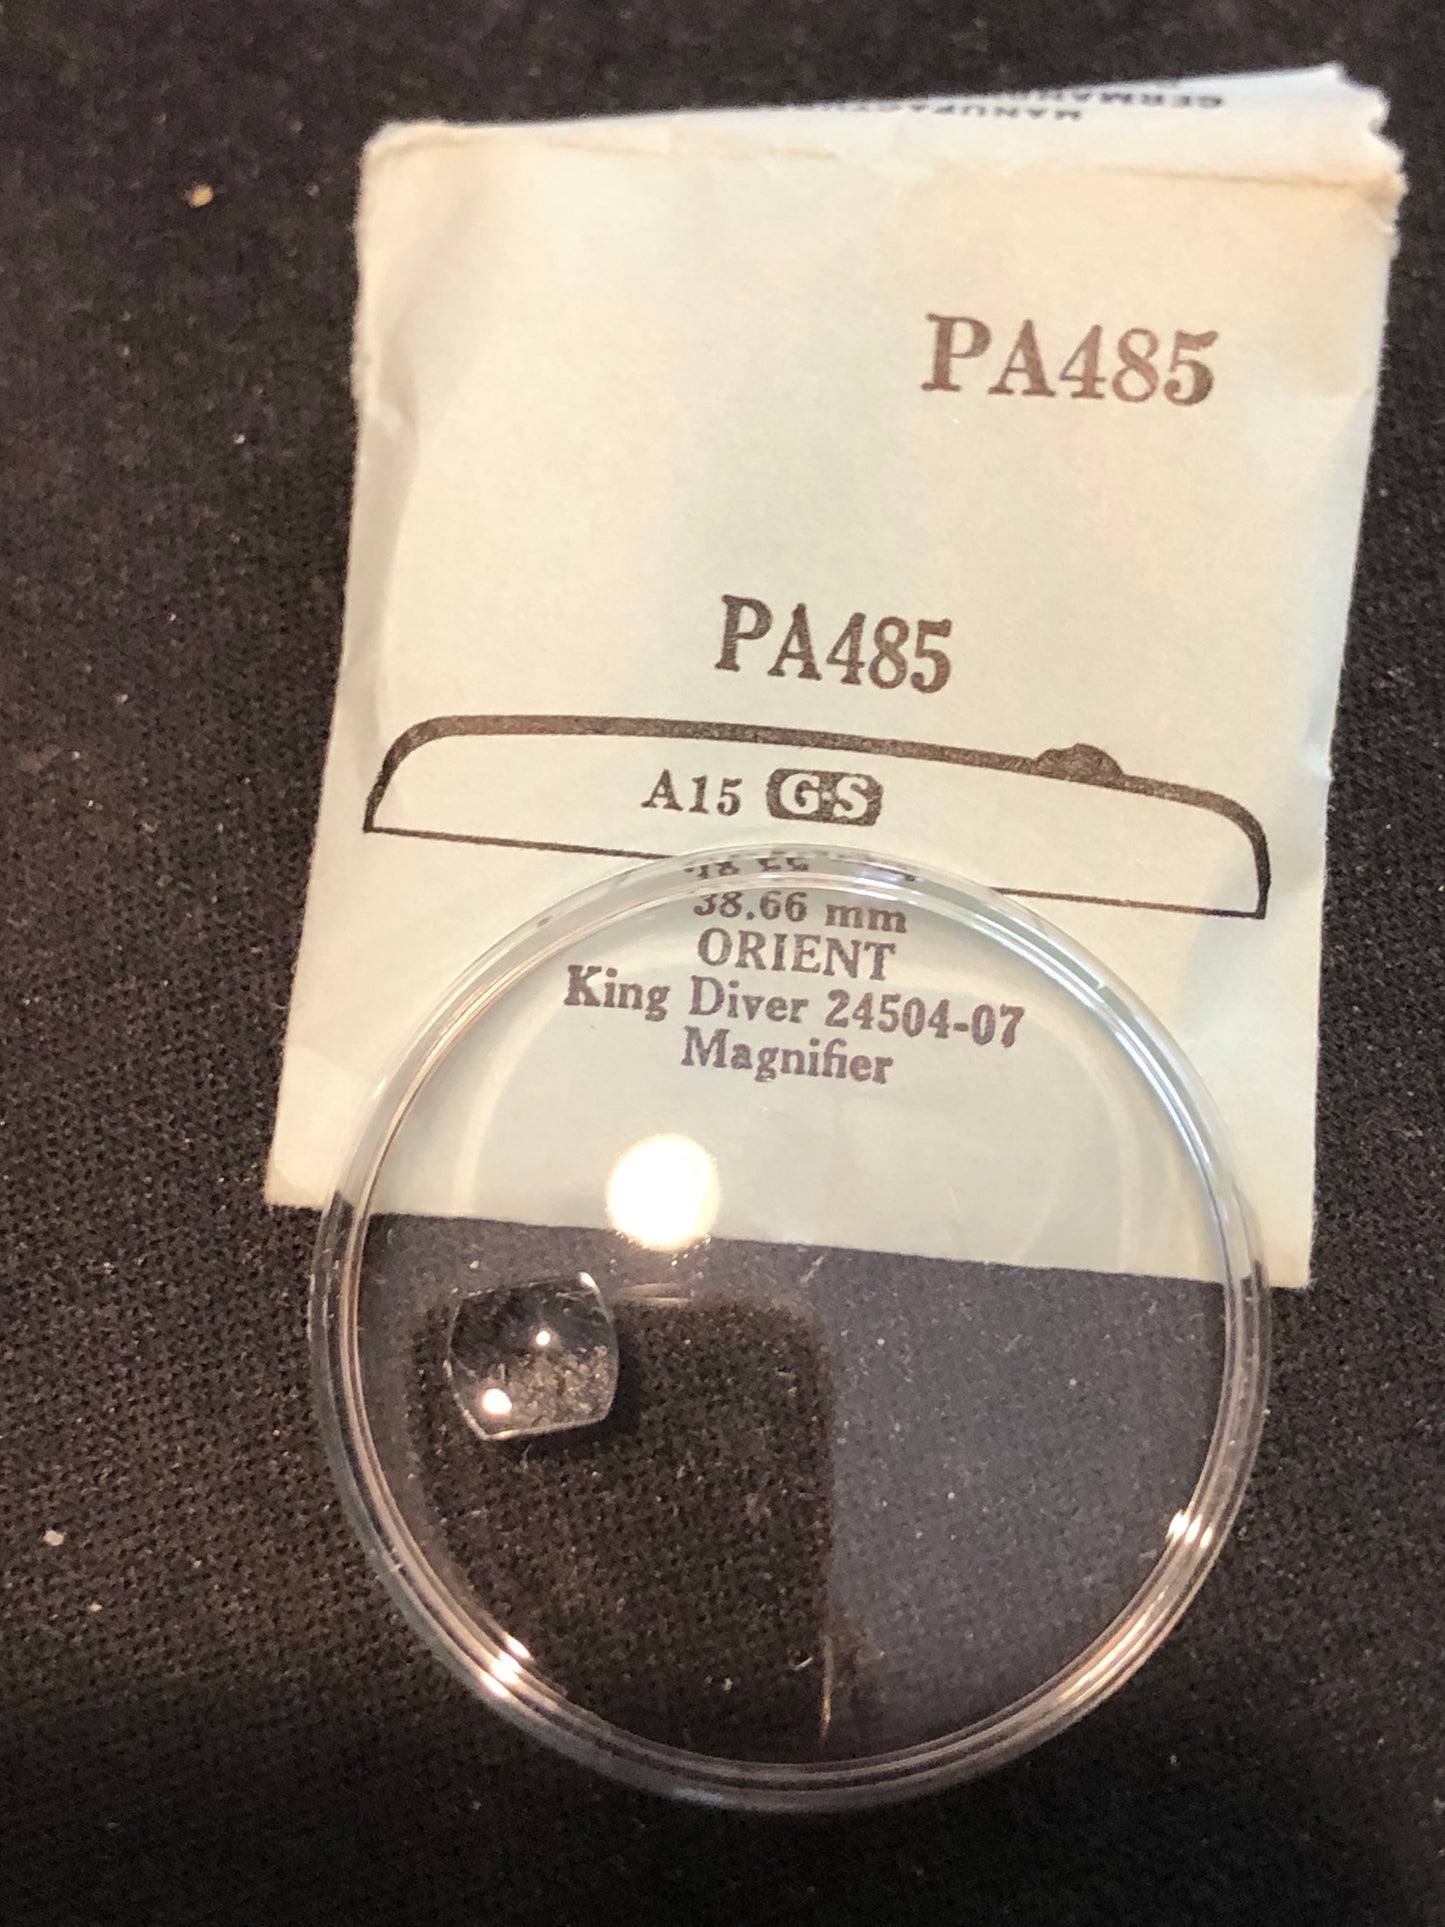 GS PA485 Watch Crystal 38.66 mm for Orient King Diver 24504-07 - New